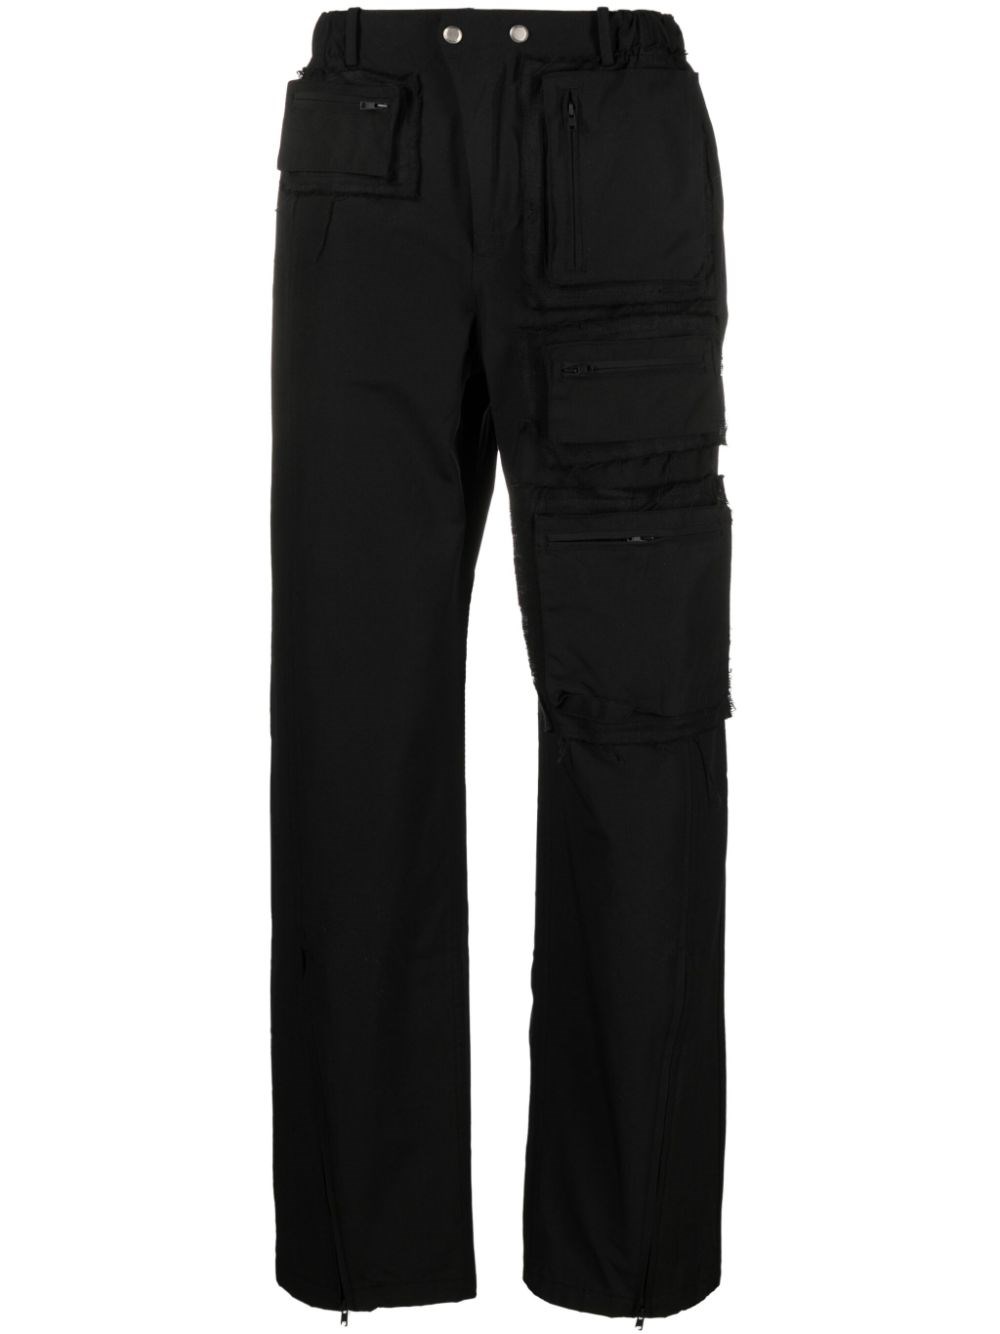 ANDERSSON BELL RAW EDGE MULTI-POCKET PANTS